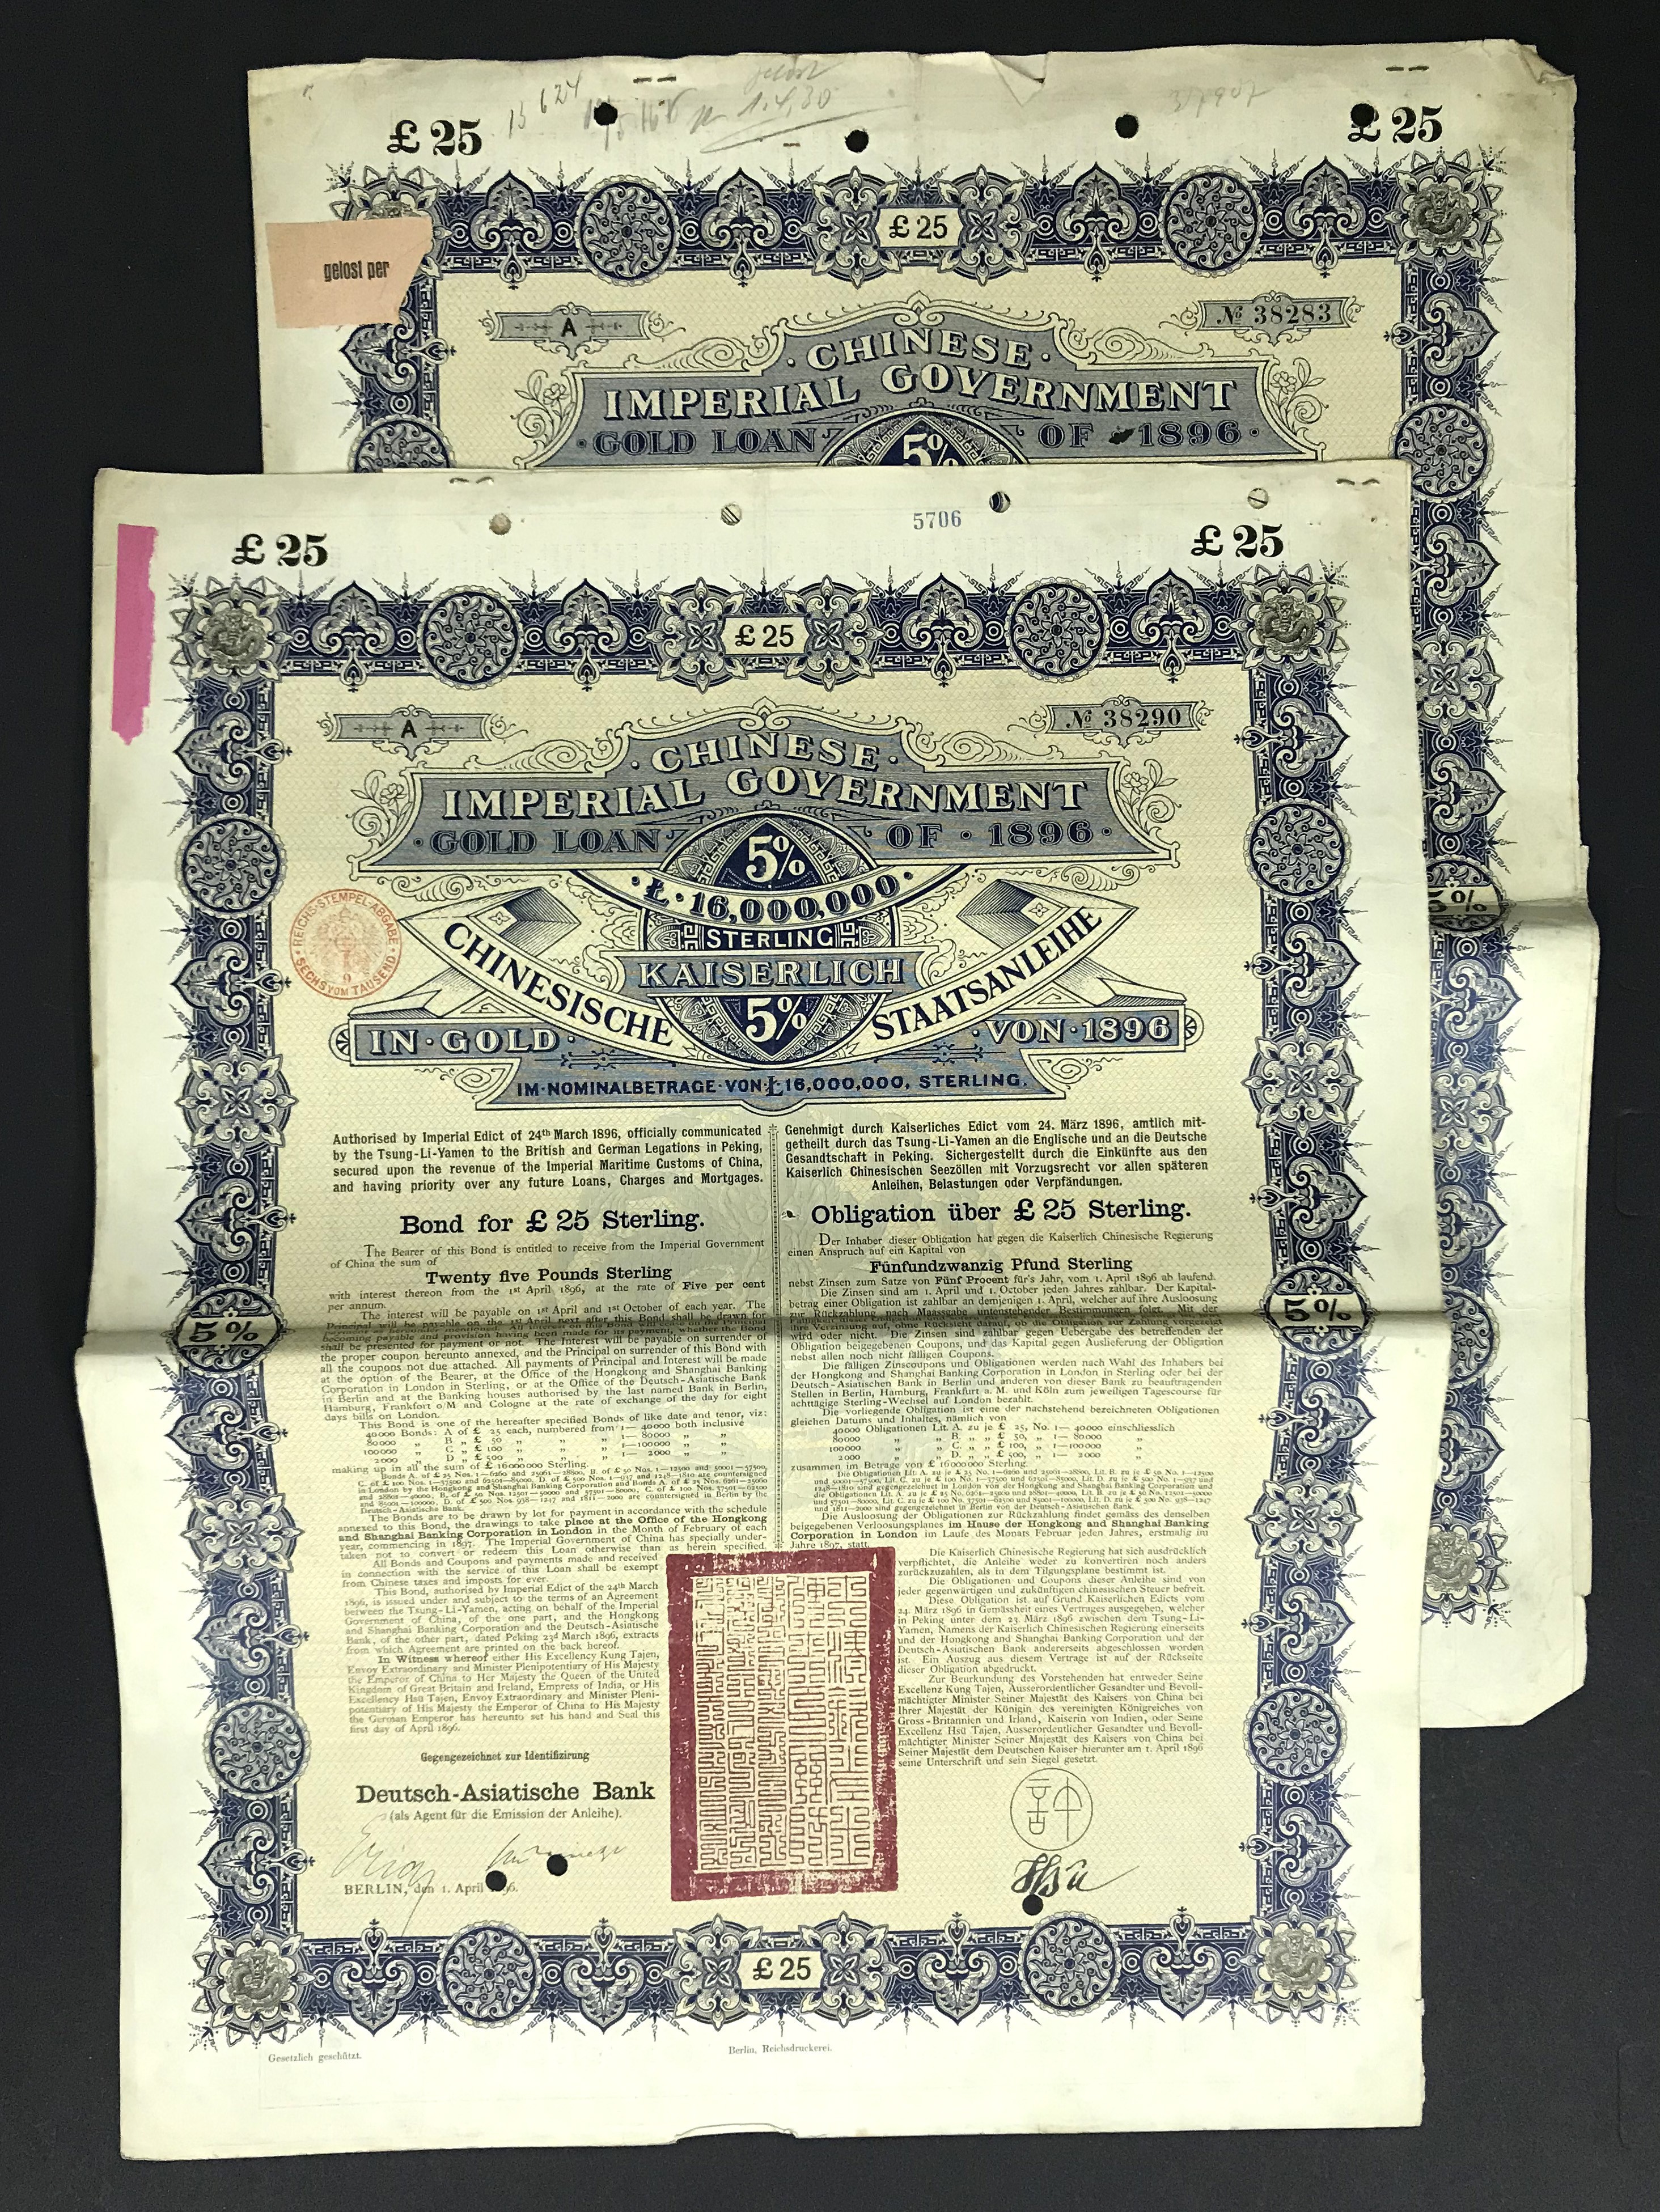 TWO CHINESE IMPERIAL GOVERNMENT 1898 5% GOLD LOAN £100 BOND CERTIFICATES - Image 2 of 3